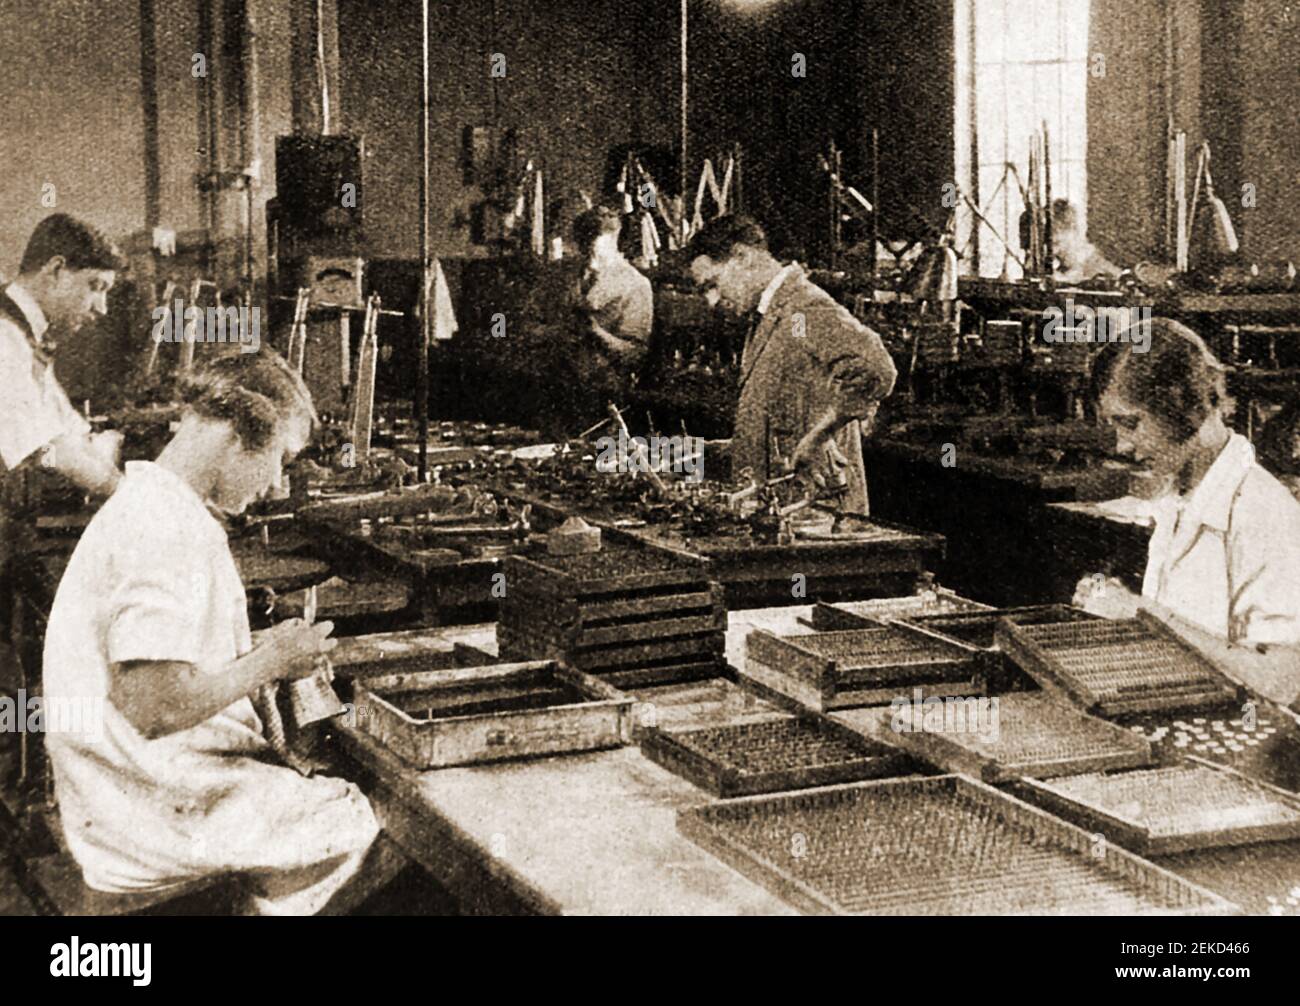 An early press photo showing workers at Kodak Camera factory in Britain checking camera lenses. Stock Photo